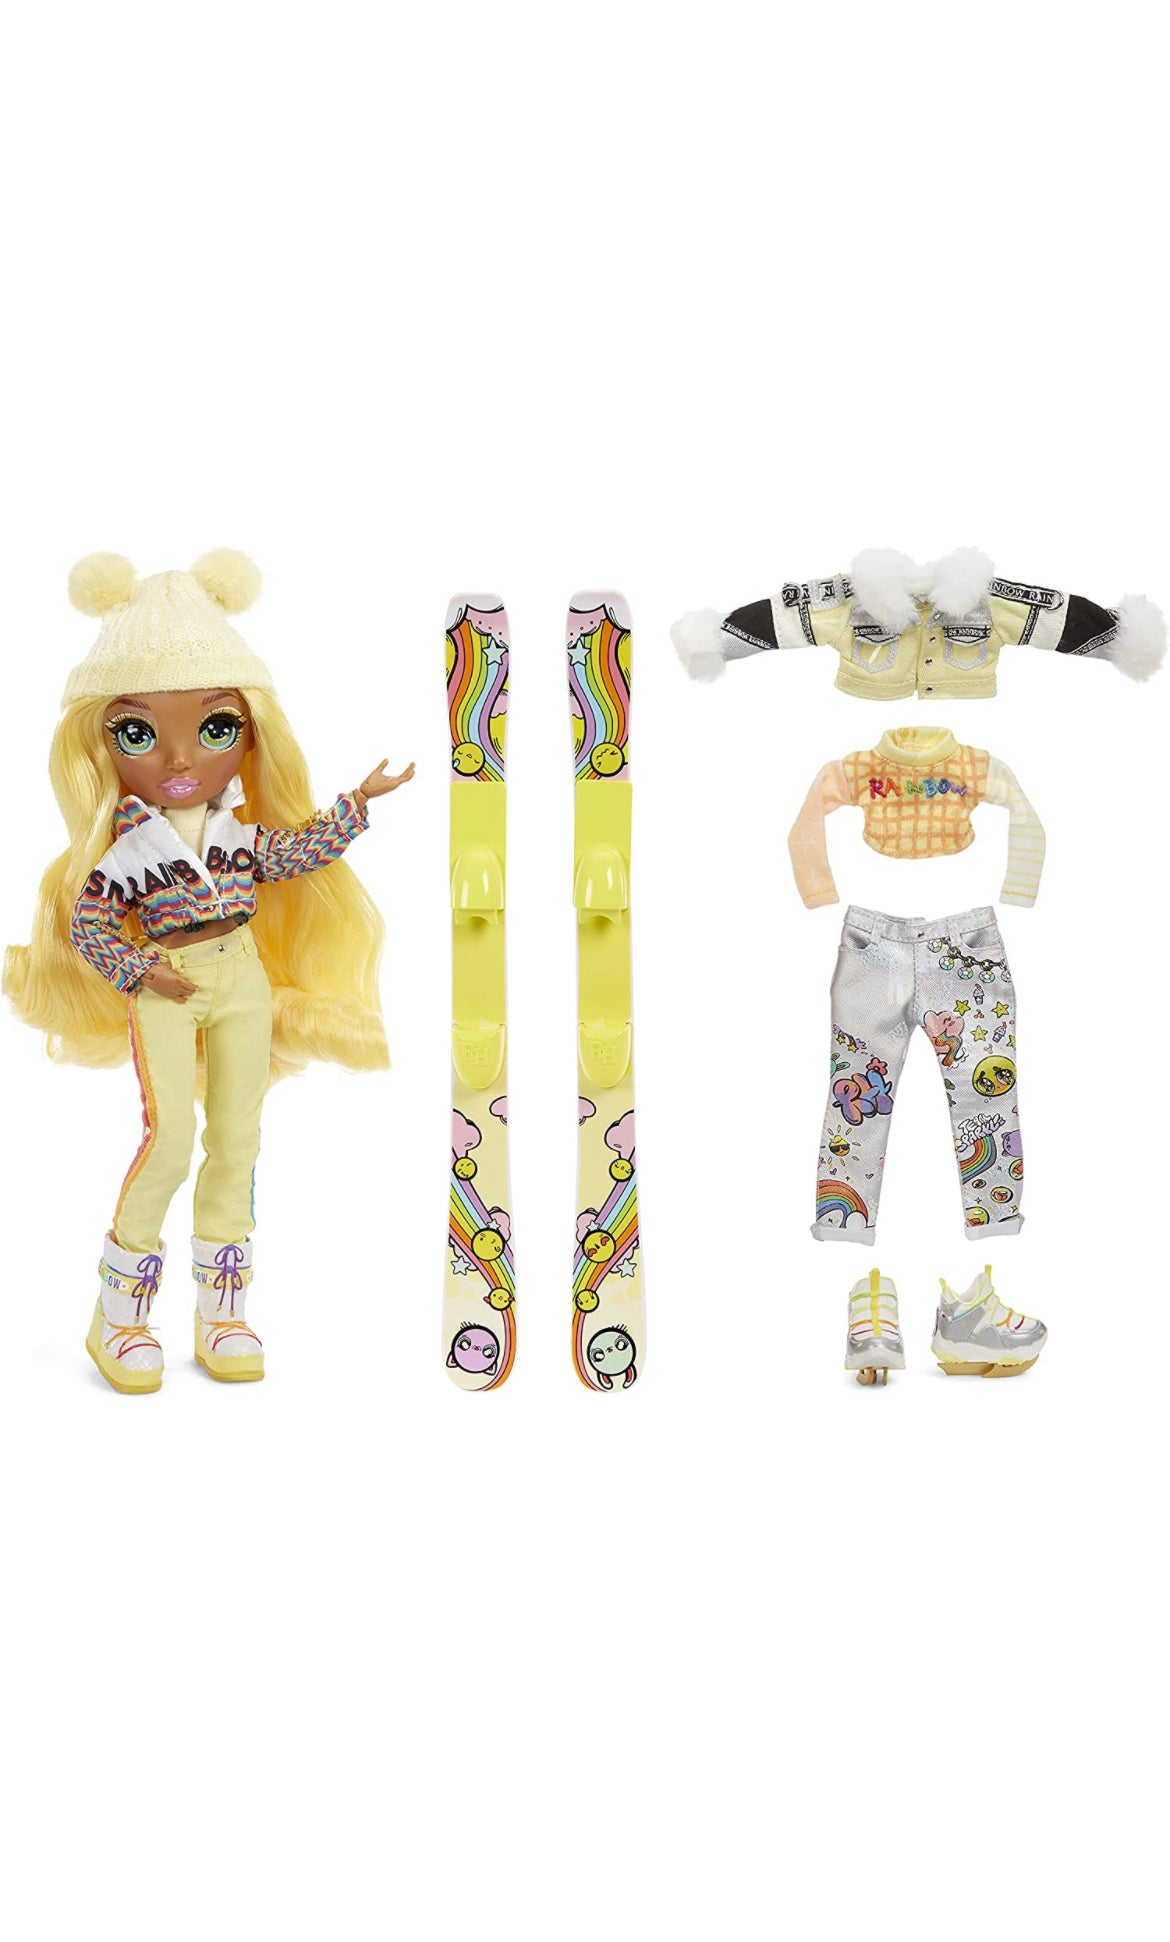 Rainbow Surprise Rainbow High Sunny Madison - Yellow Clothes Fashion Doll  with 2 Complete Mix & Match Outfits and Accessories, Toys for Kids 6 to 12